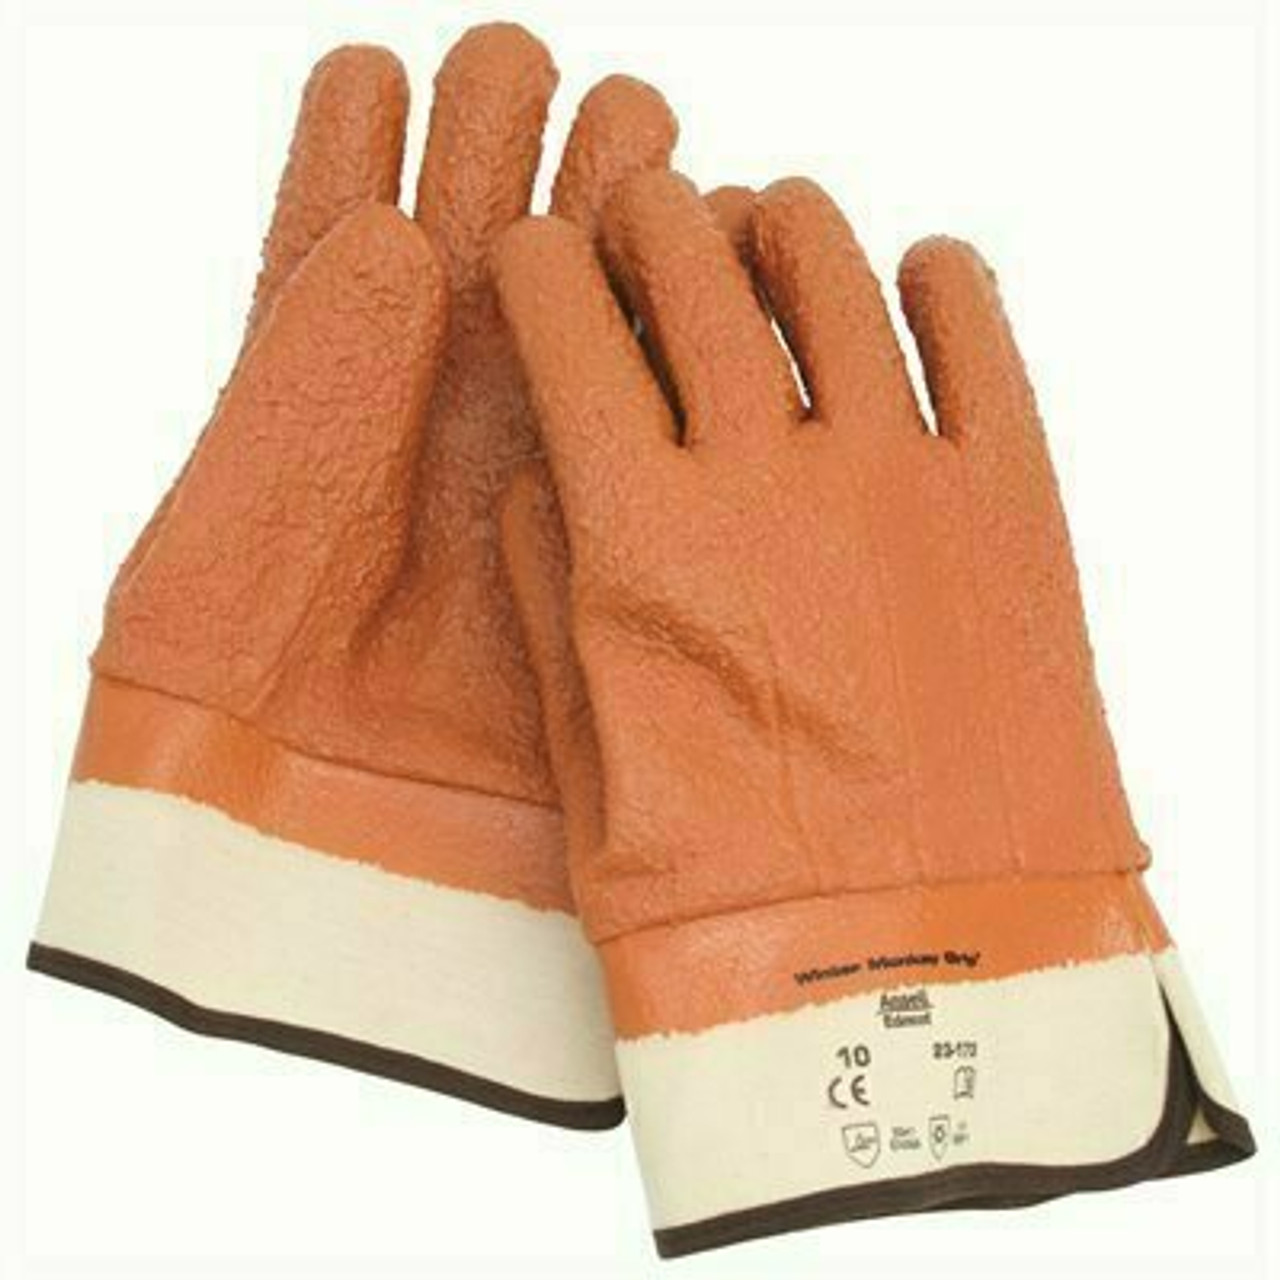 Ansell Protective Products Winter Monkey Grip Tex Insulated Gloves With Safety Cuffs, Orange